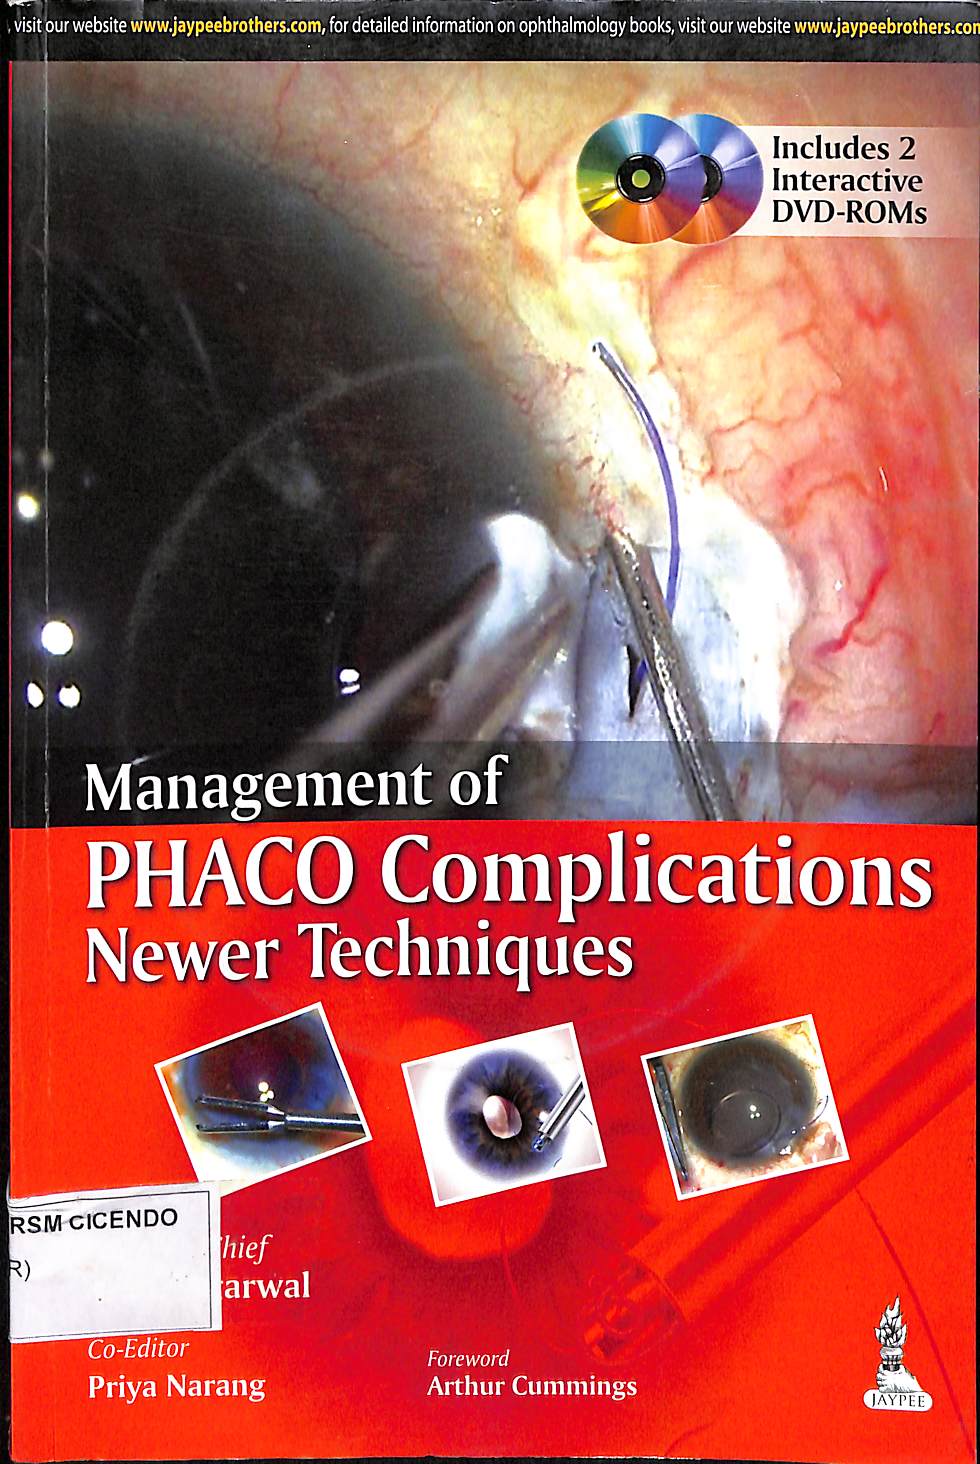 management of phaco complications newer techniques